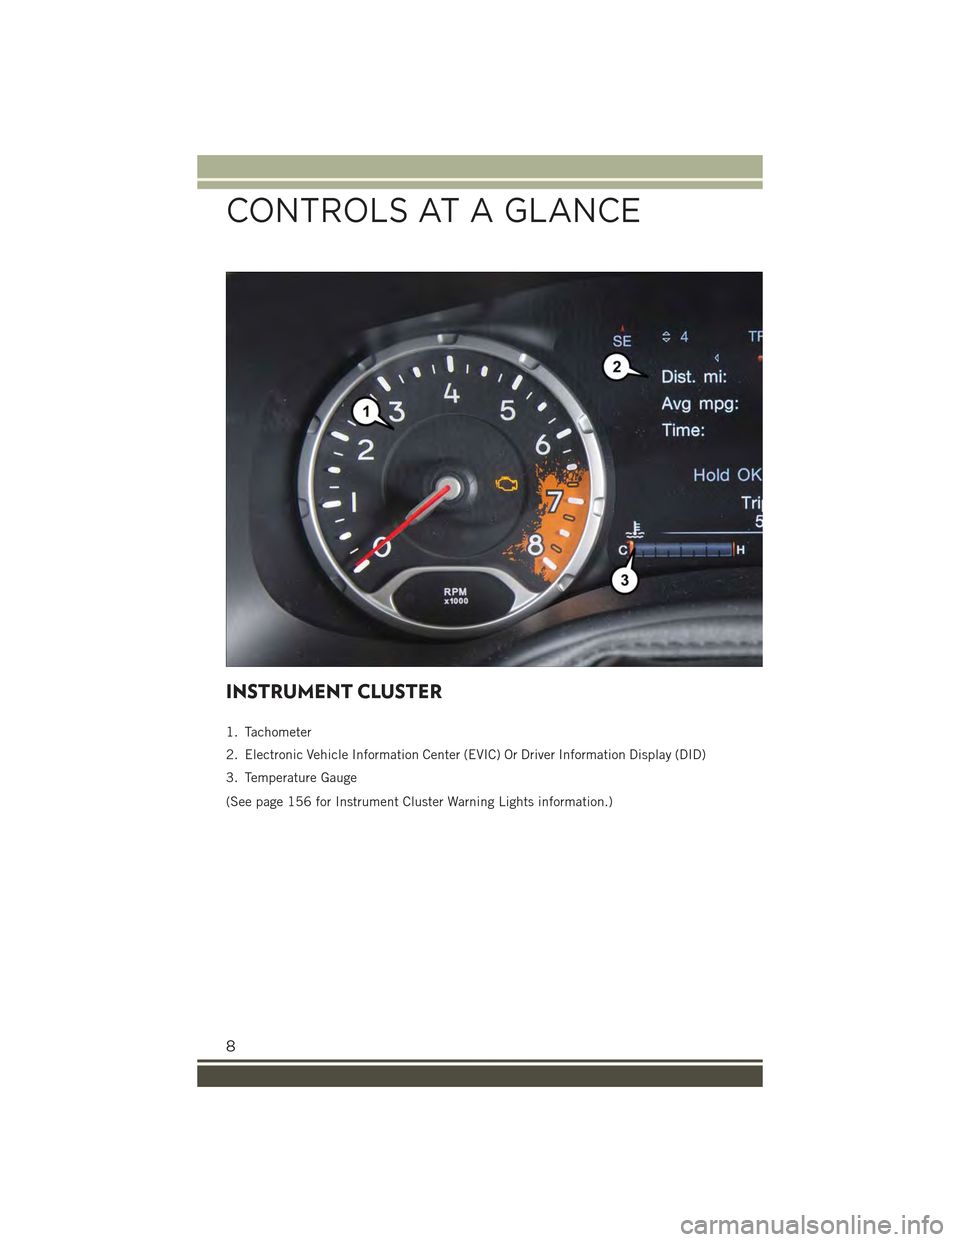 JEEP RENEGADE 2015 1.G User Guide INSTRUMENT CLUSTER
1. Tachometer
2. Electronic Vehicle Information Center (EVIC) Or Driver Information Display (DID)
3. Temperature Gauge
(See page 156 for Instrument Cluster Warning Lights informatio